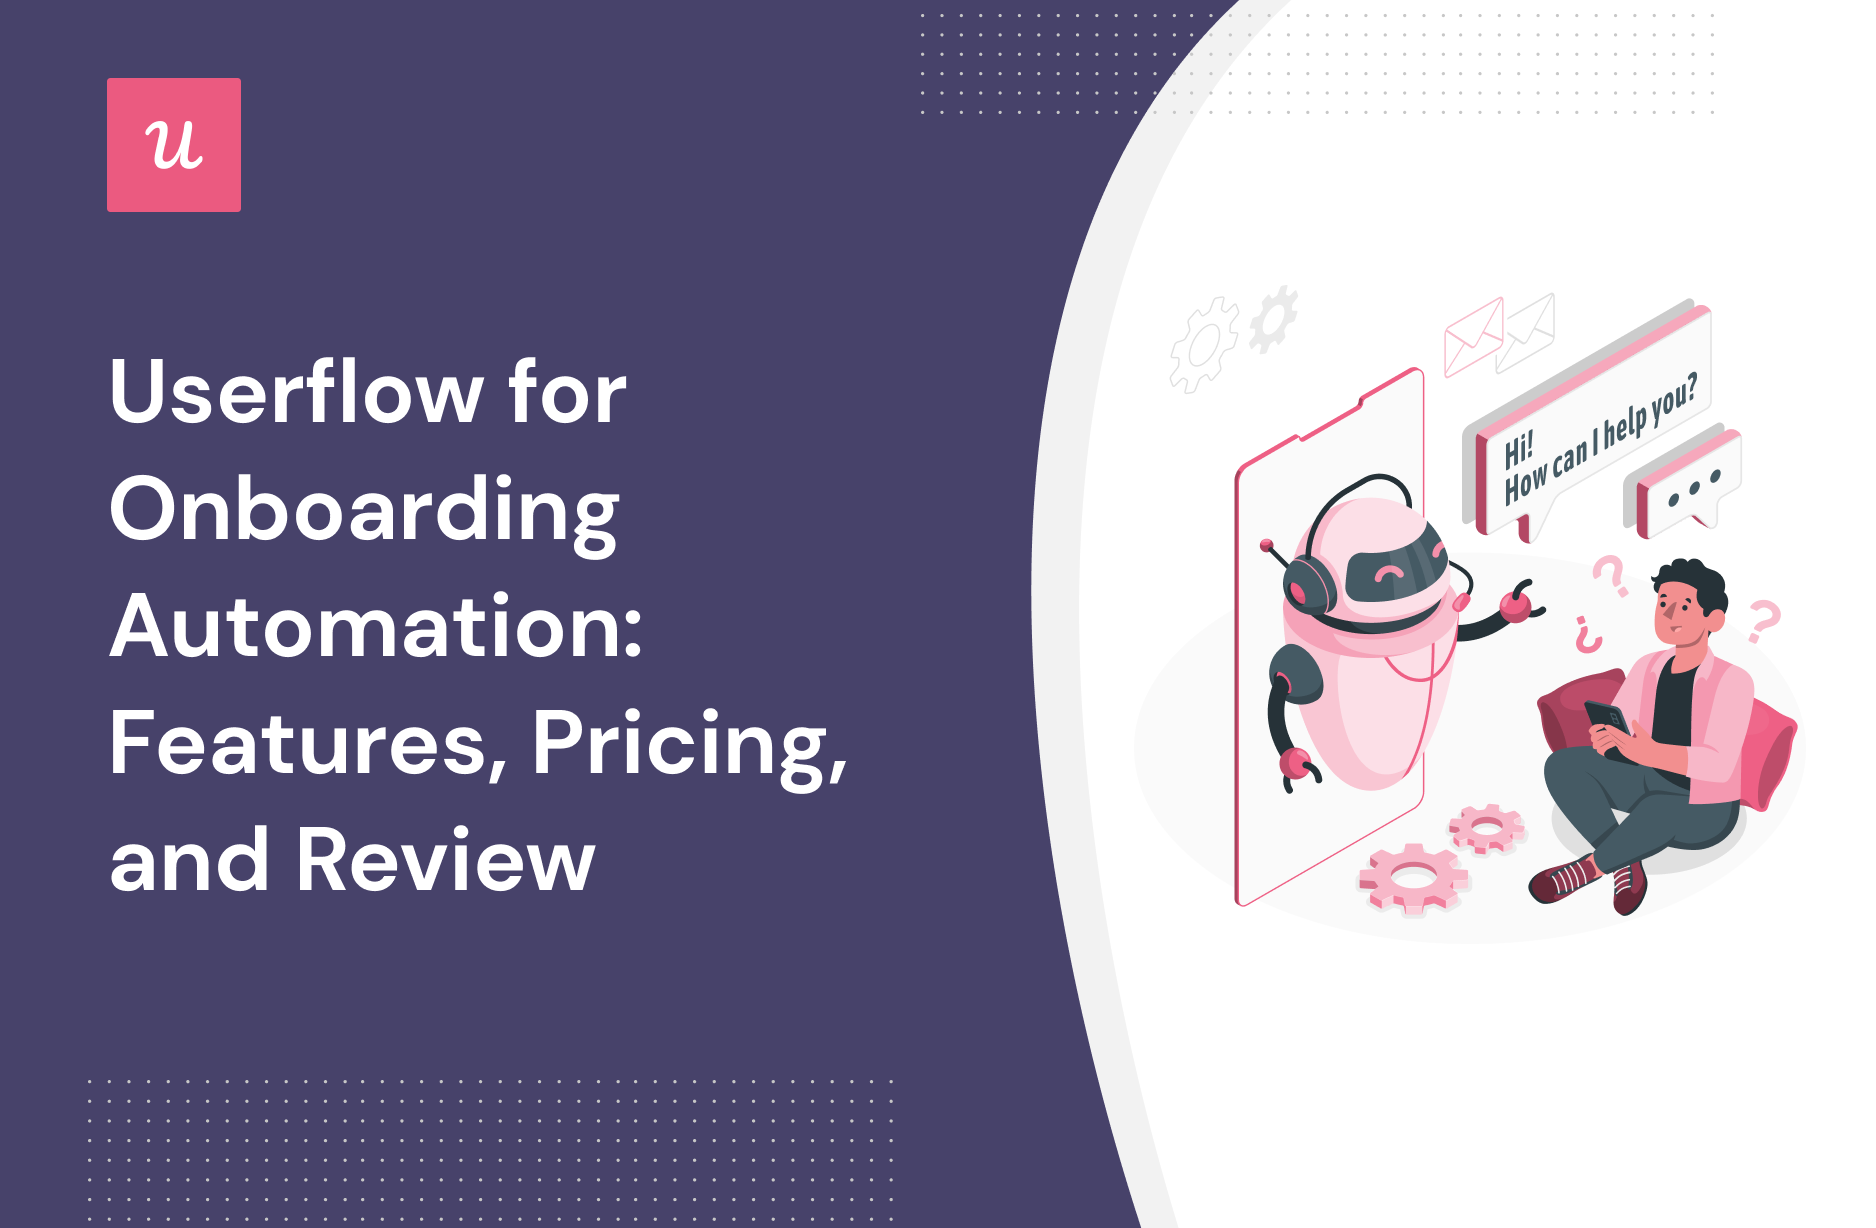 Userflow for onboarding automation: Features, Pricing, and Review